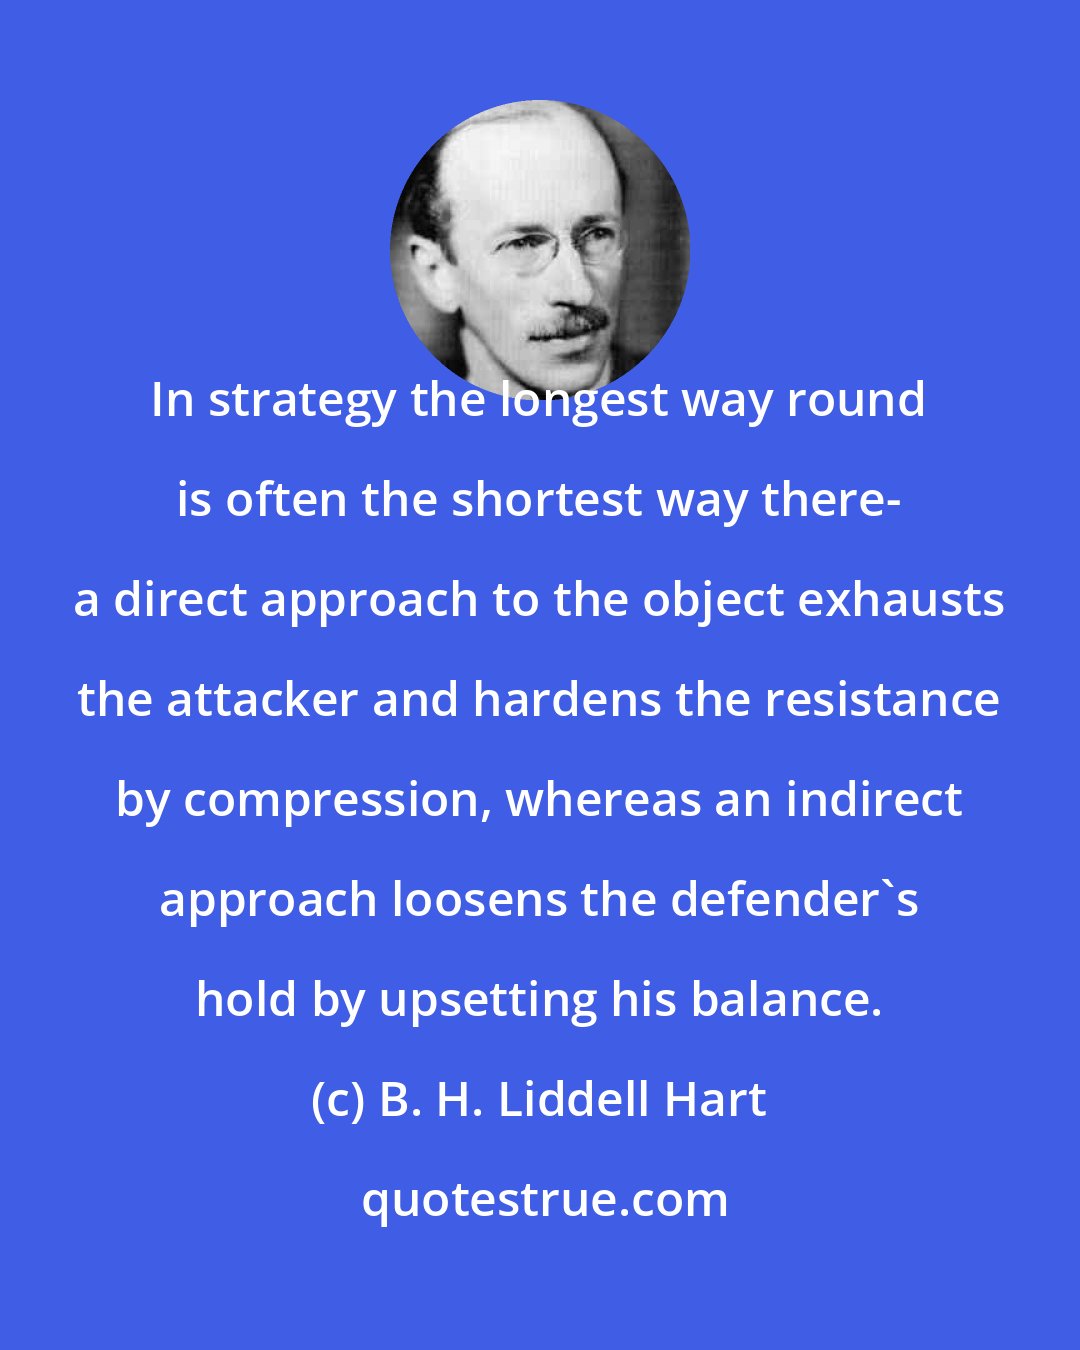 B. H. Liddell Hart: In strategy the longest way round is often the shortest way there- a direct approach to the object exhausts the attacker and hardens the resistance by compression, whereas an indirect approach loosens the defender's hold by upsetting his balance.